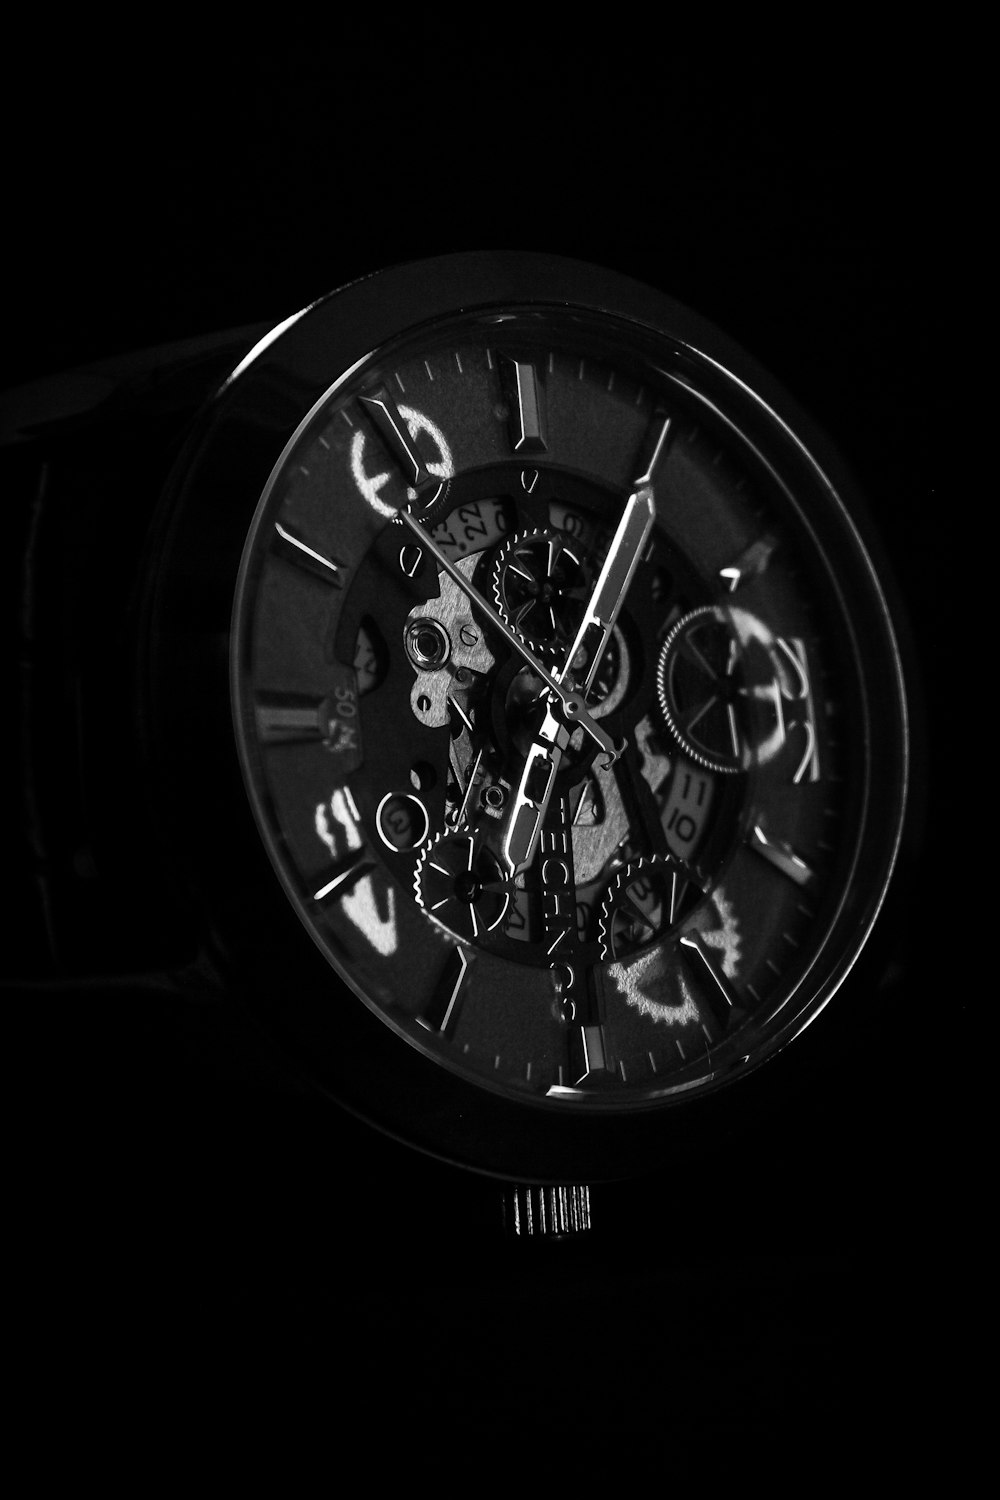 a black and white photo of a watch in the dark